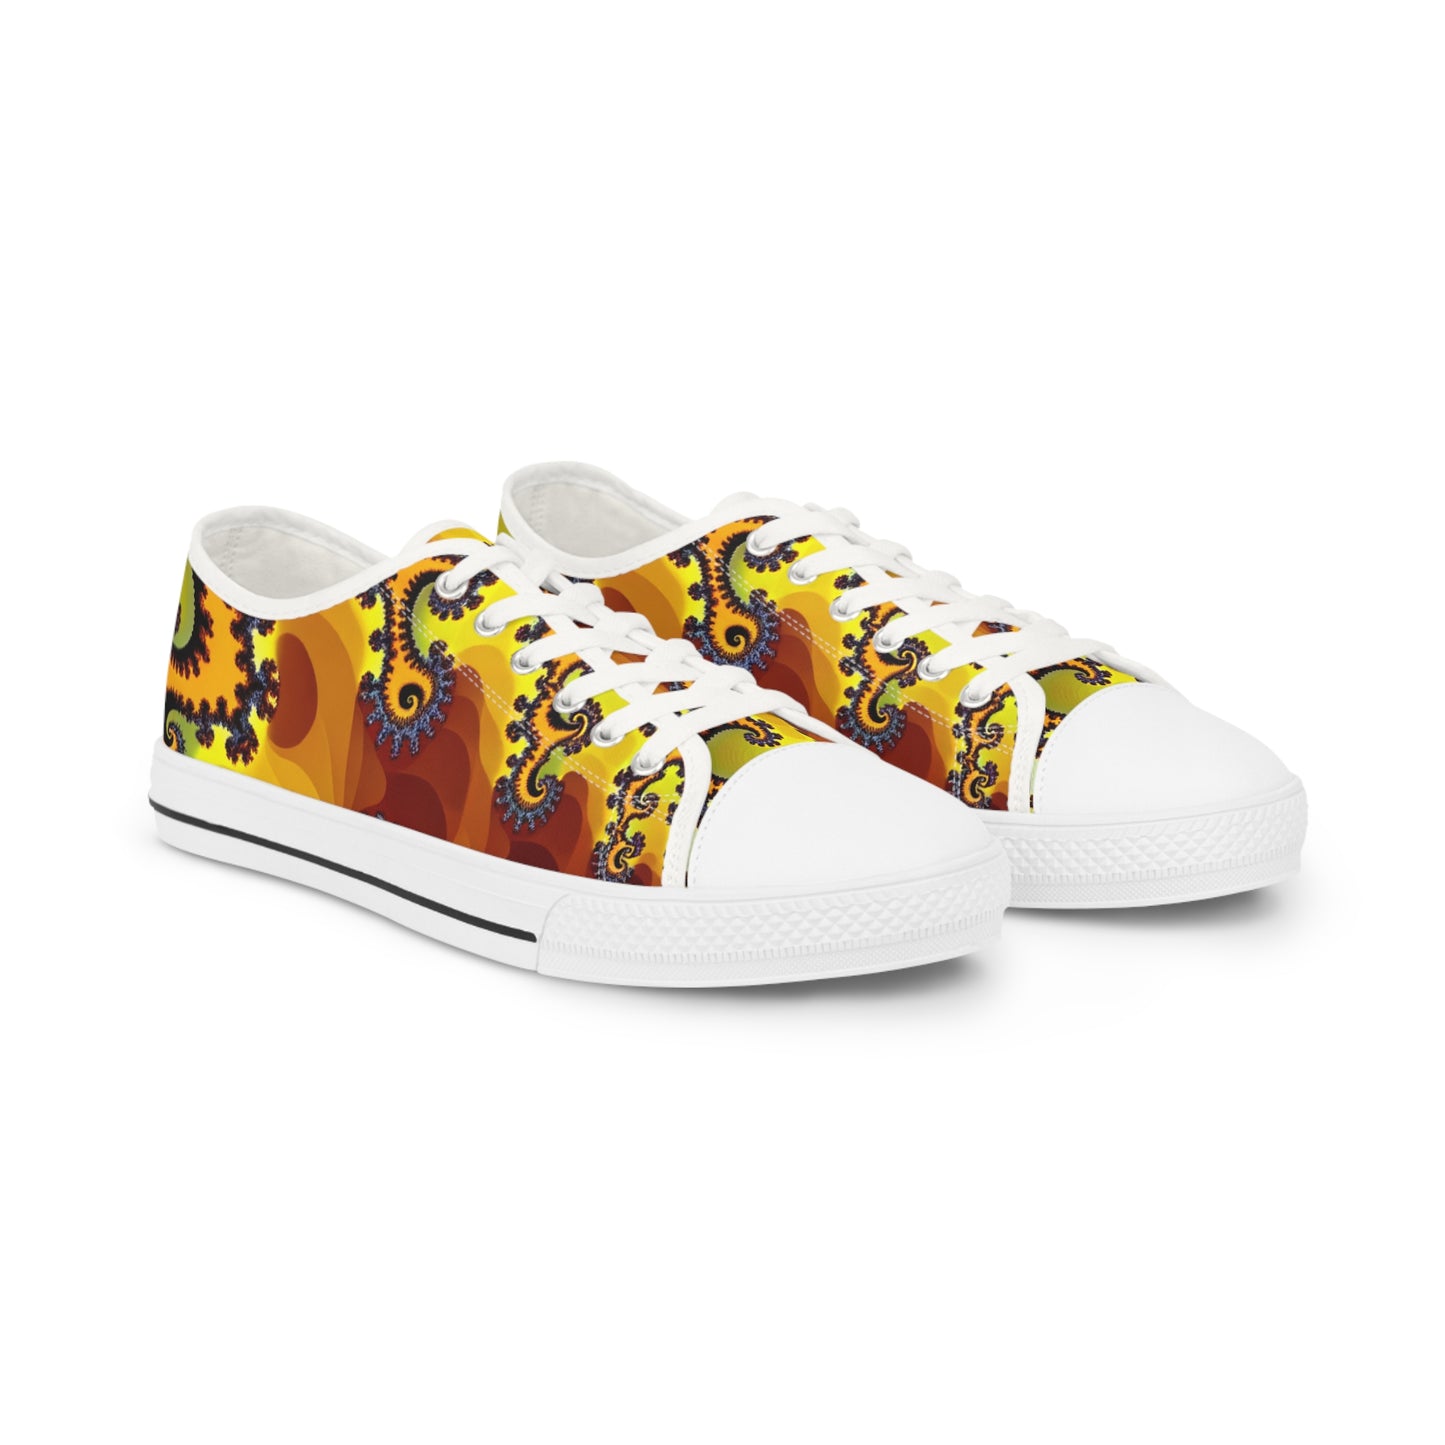 Sunny Spiral Fractal Fusion Low Top Sneakers - Men's